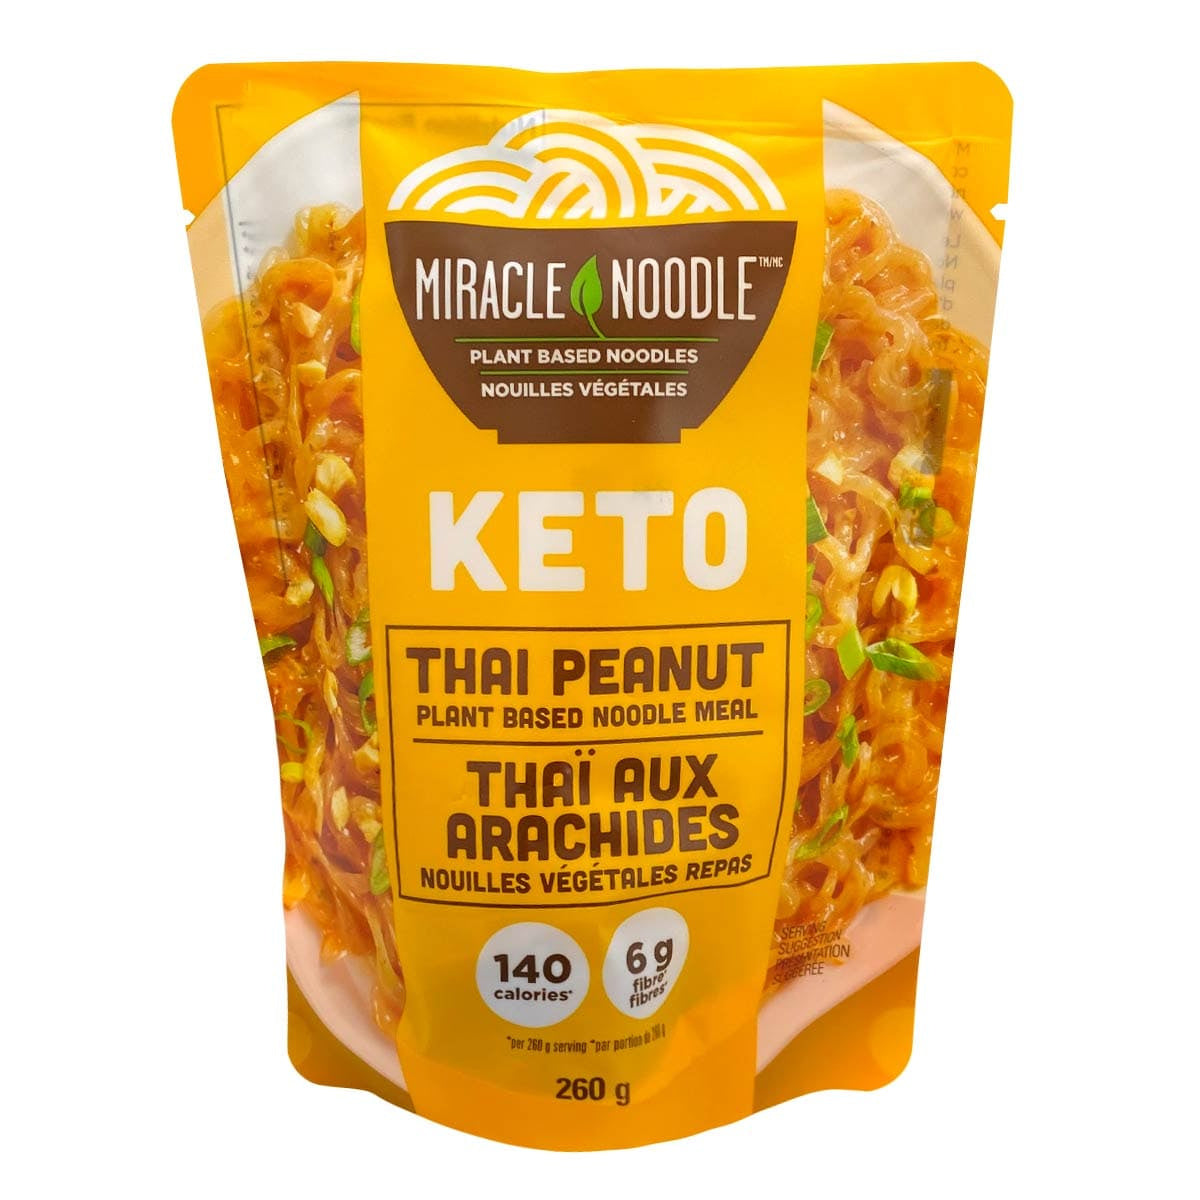 Miracle Noodle Ready-to-Eat Meals